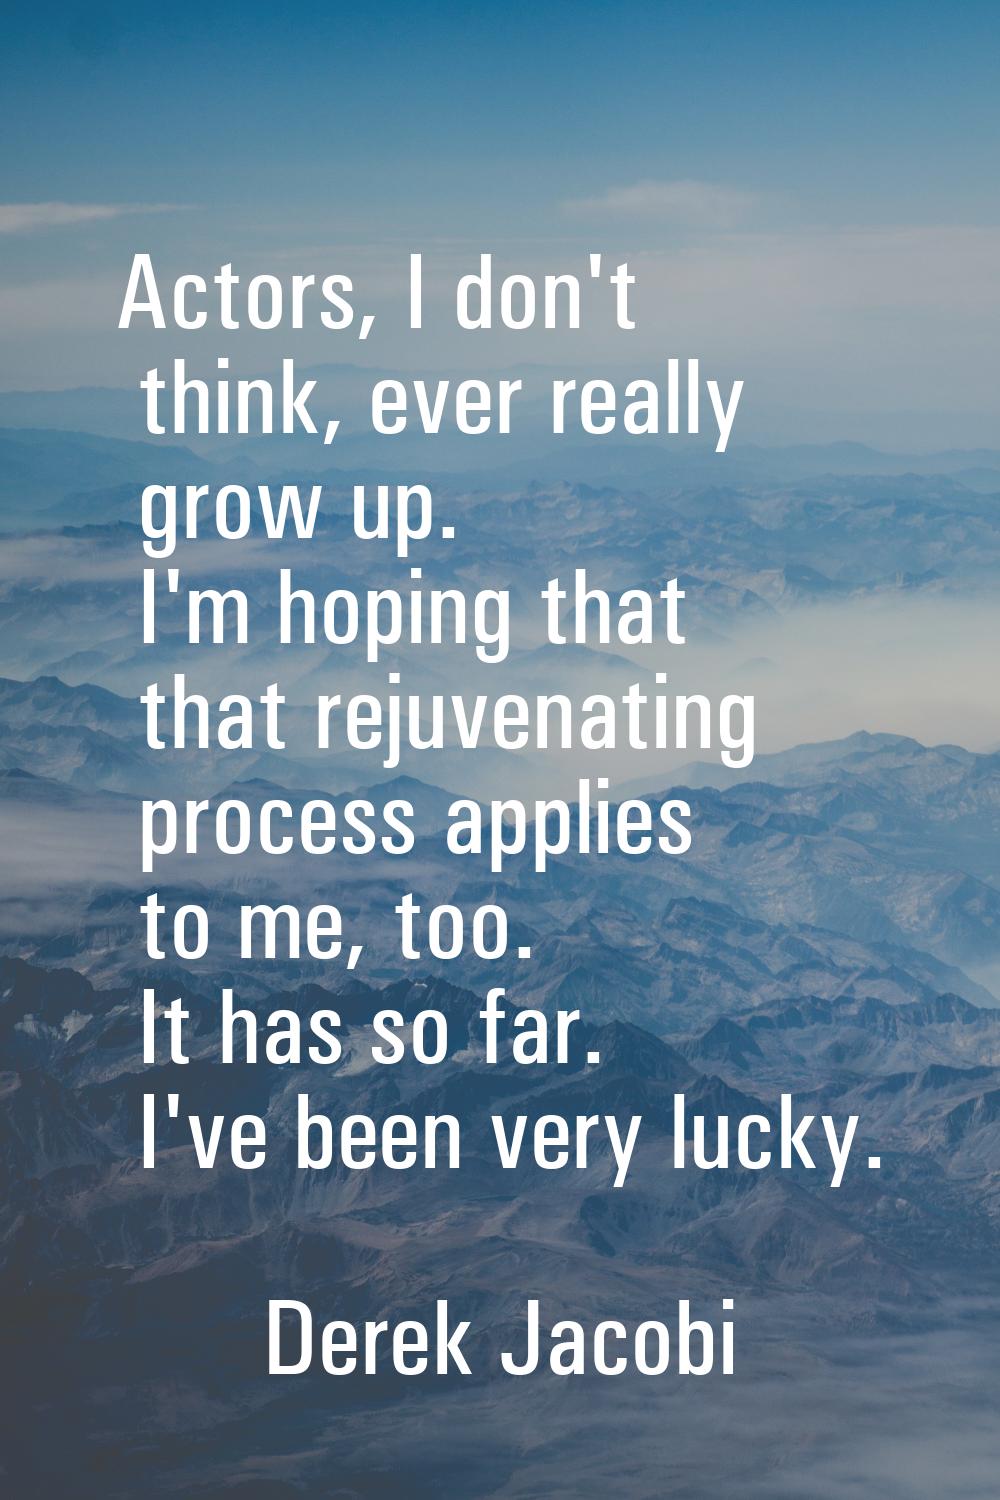 Actors, I don't think, ever really grow up. I'm hoping that that rejuvenating process applies to me